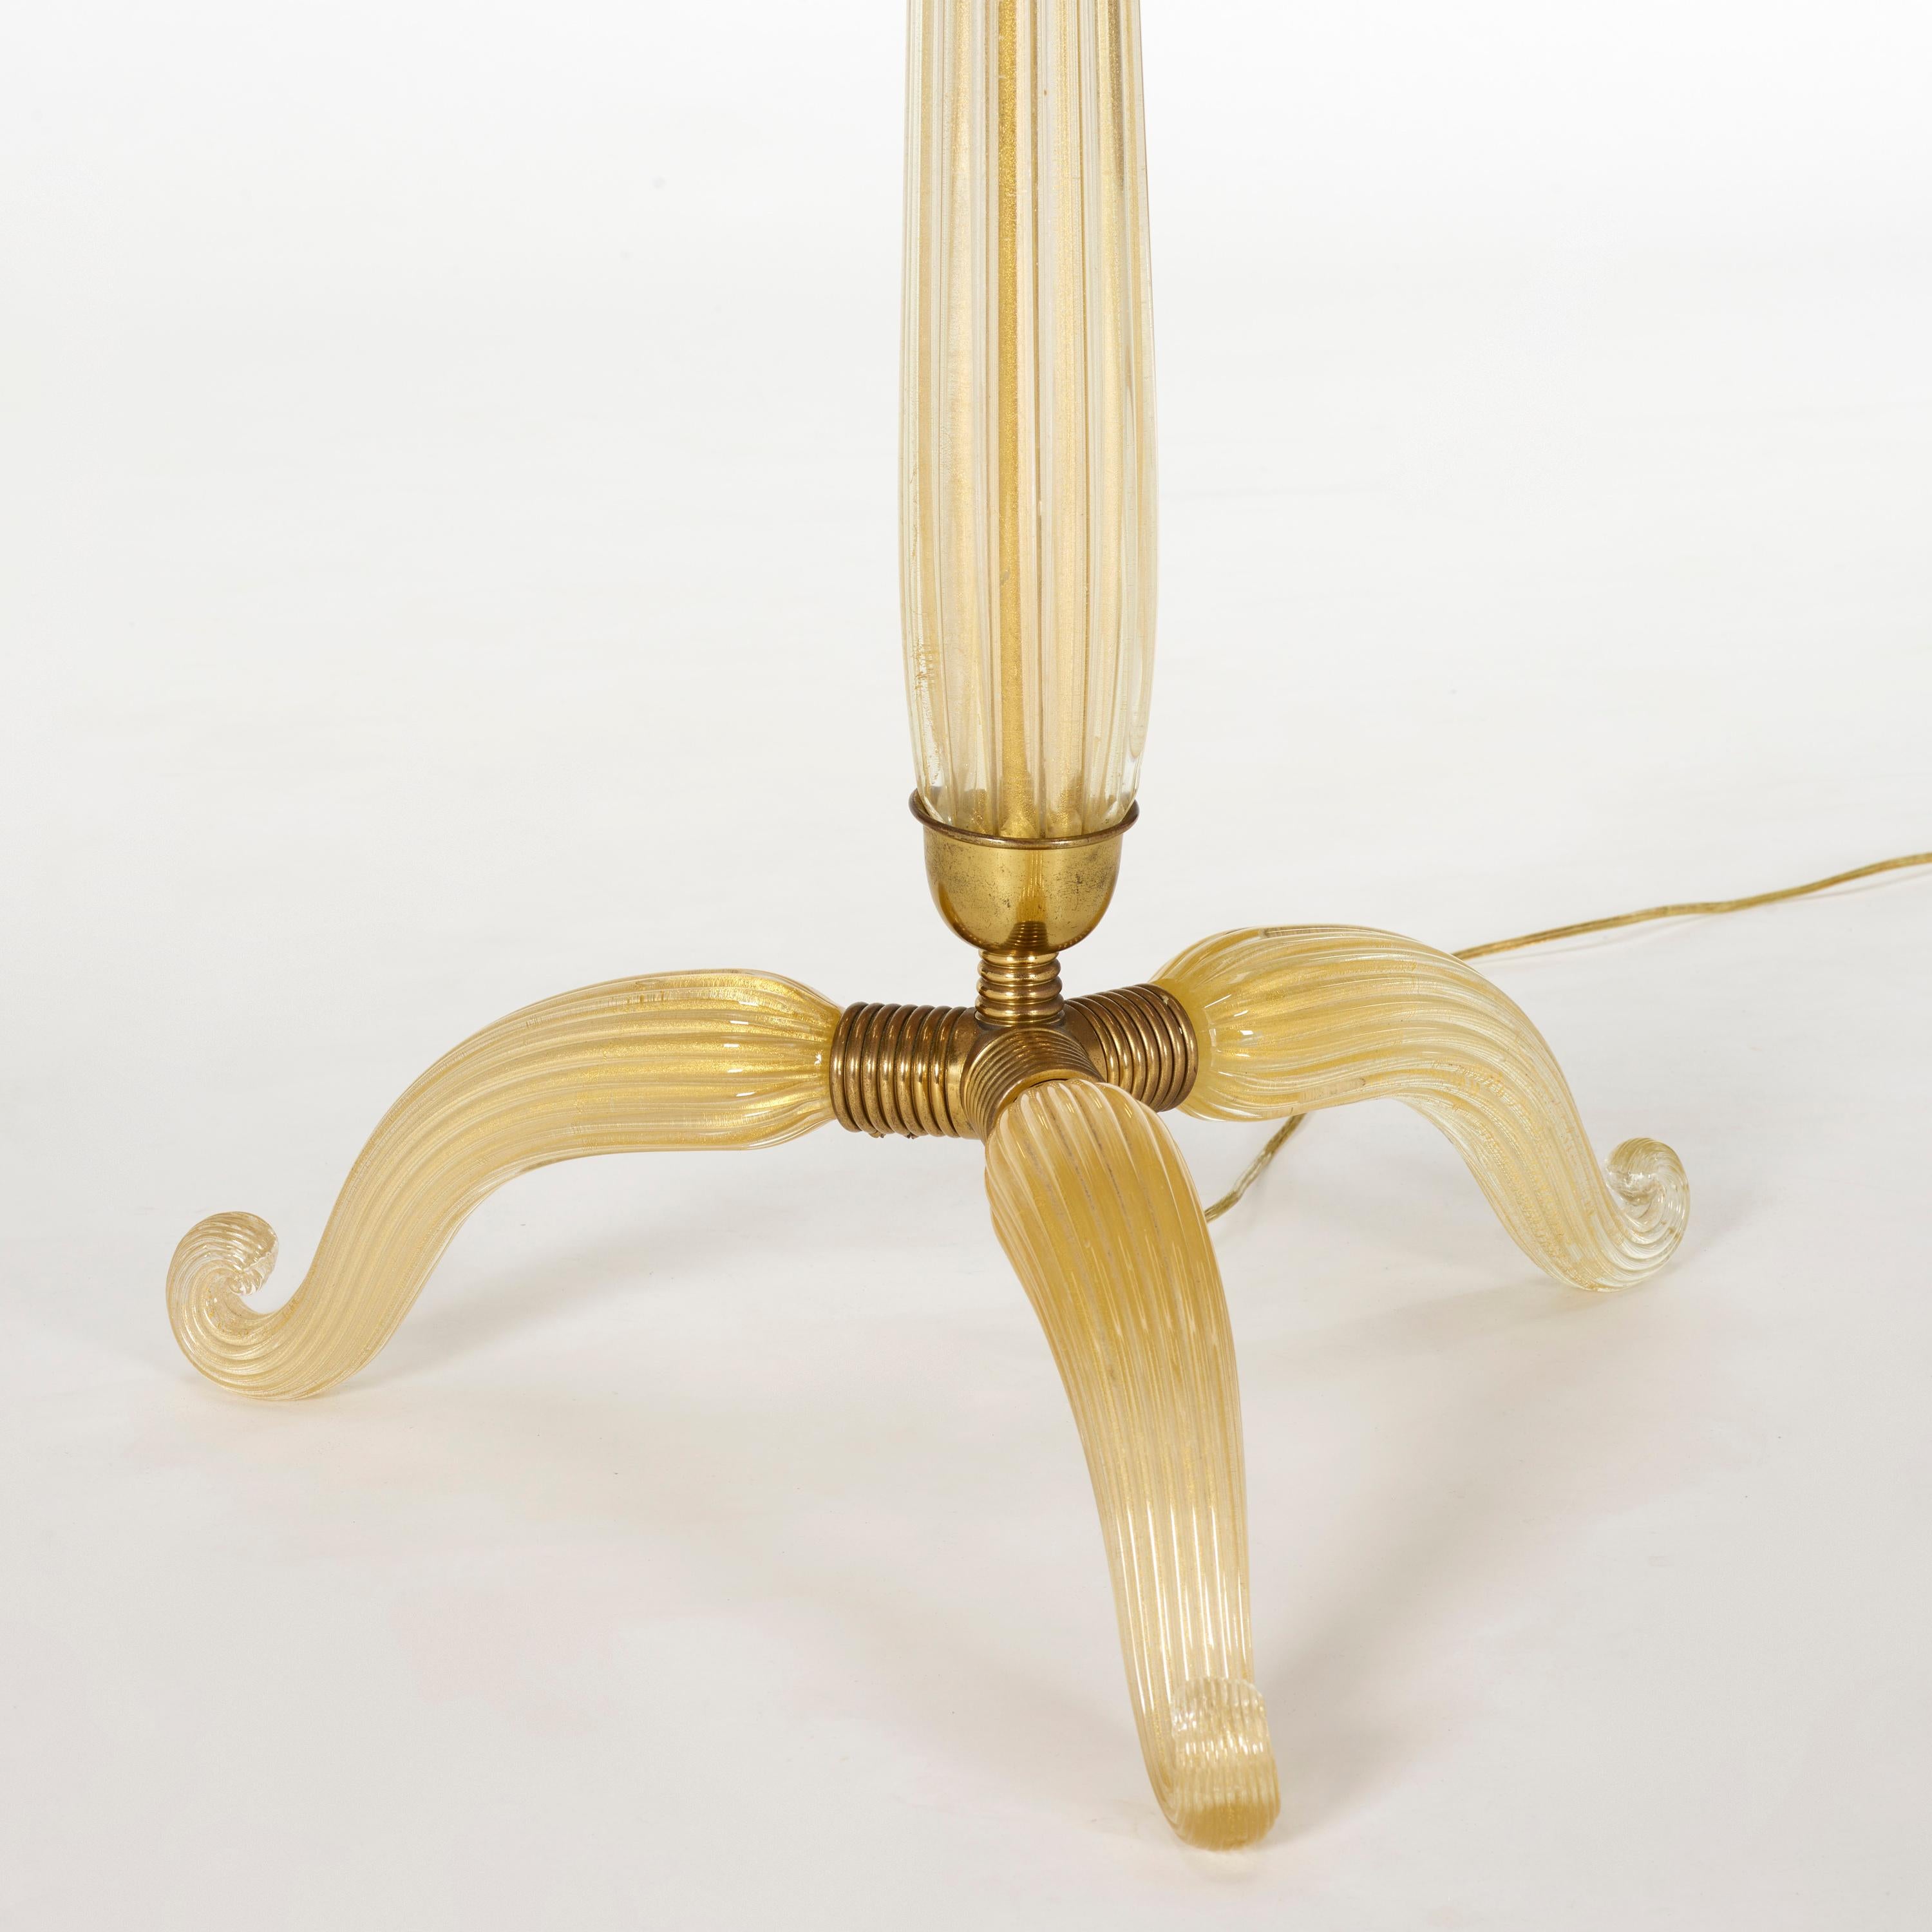 Rare Murano glass floor lamp with gold foil inclusions and bronze mounts by Baro For Sale 1